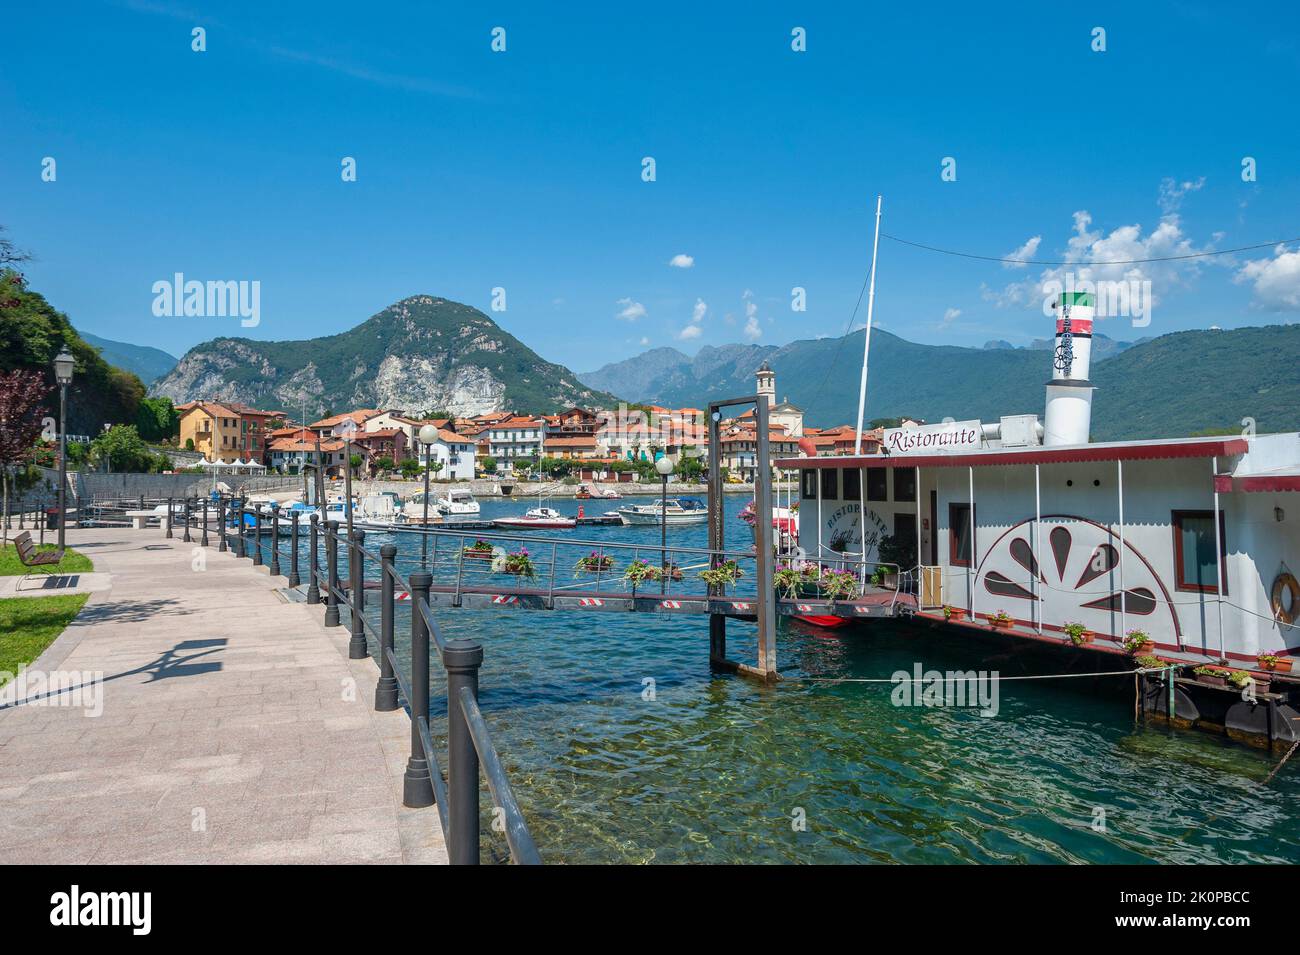 Townscape with harbor and beach, Feriolo, Piedmont, Italy, Europe Stock Photo